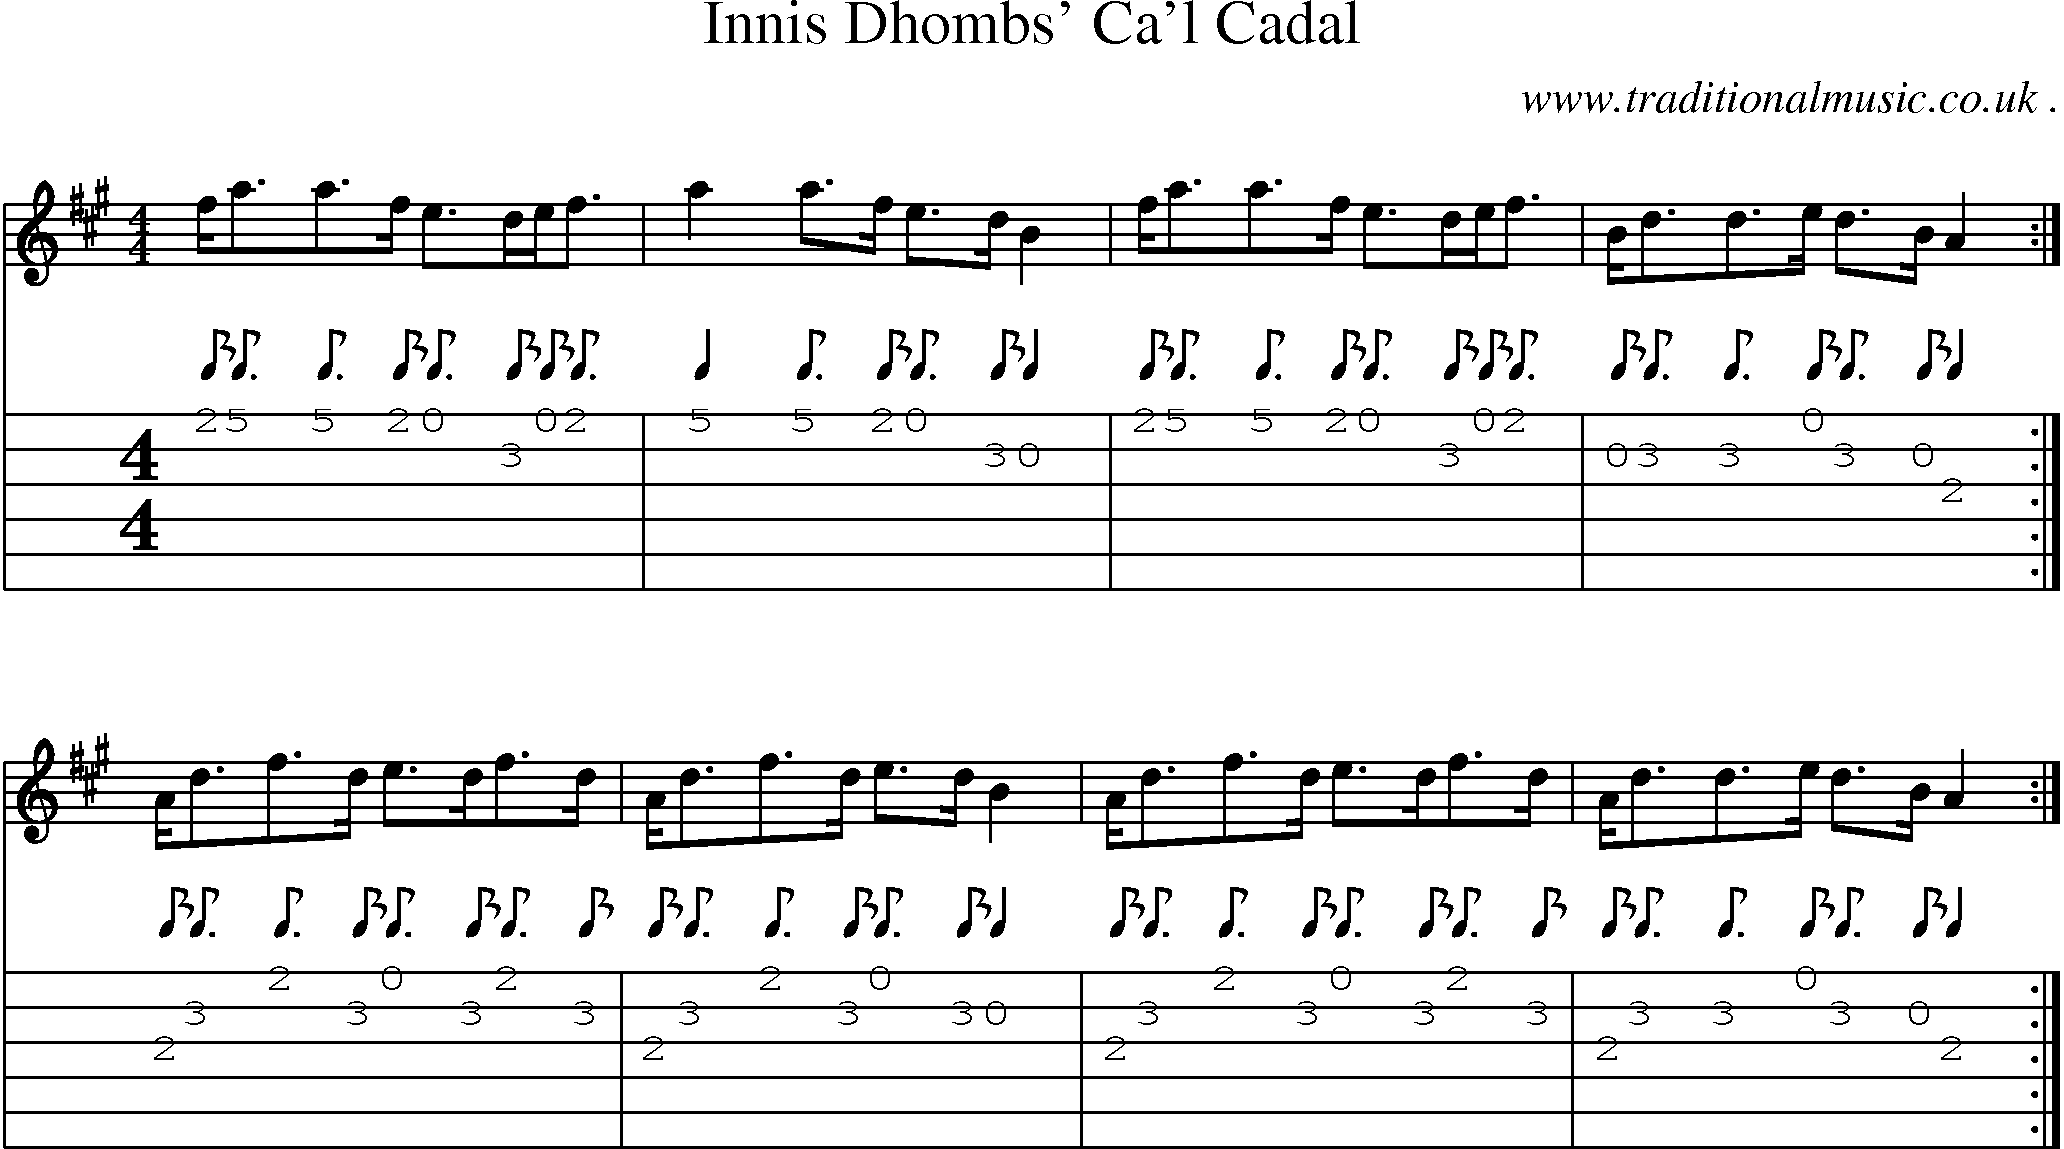 Sheet-music  score, Chords and Guitar Tabs for Innis Dhombs Cal Cadal